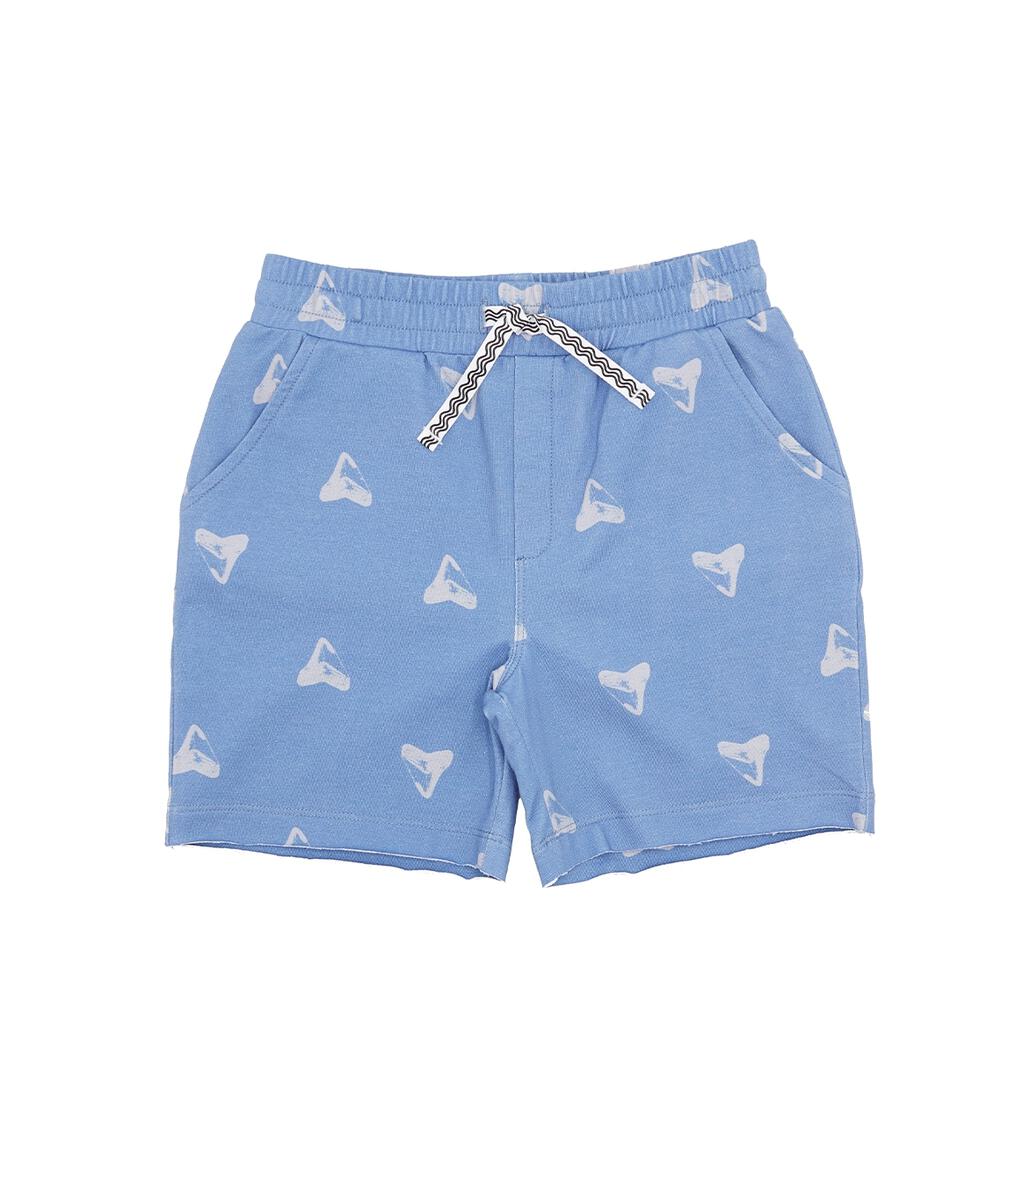 Feather 4 Arrow - Low Tide Shark Tooth Shorts